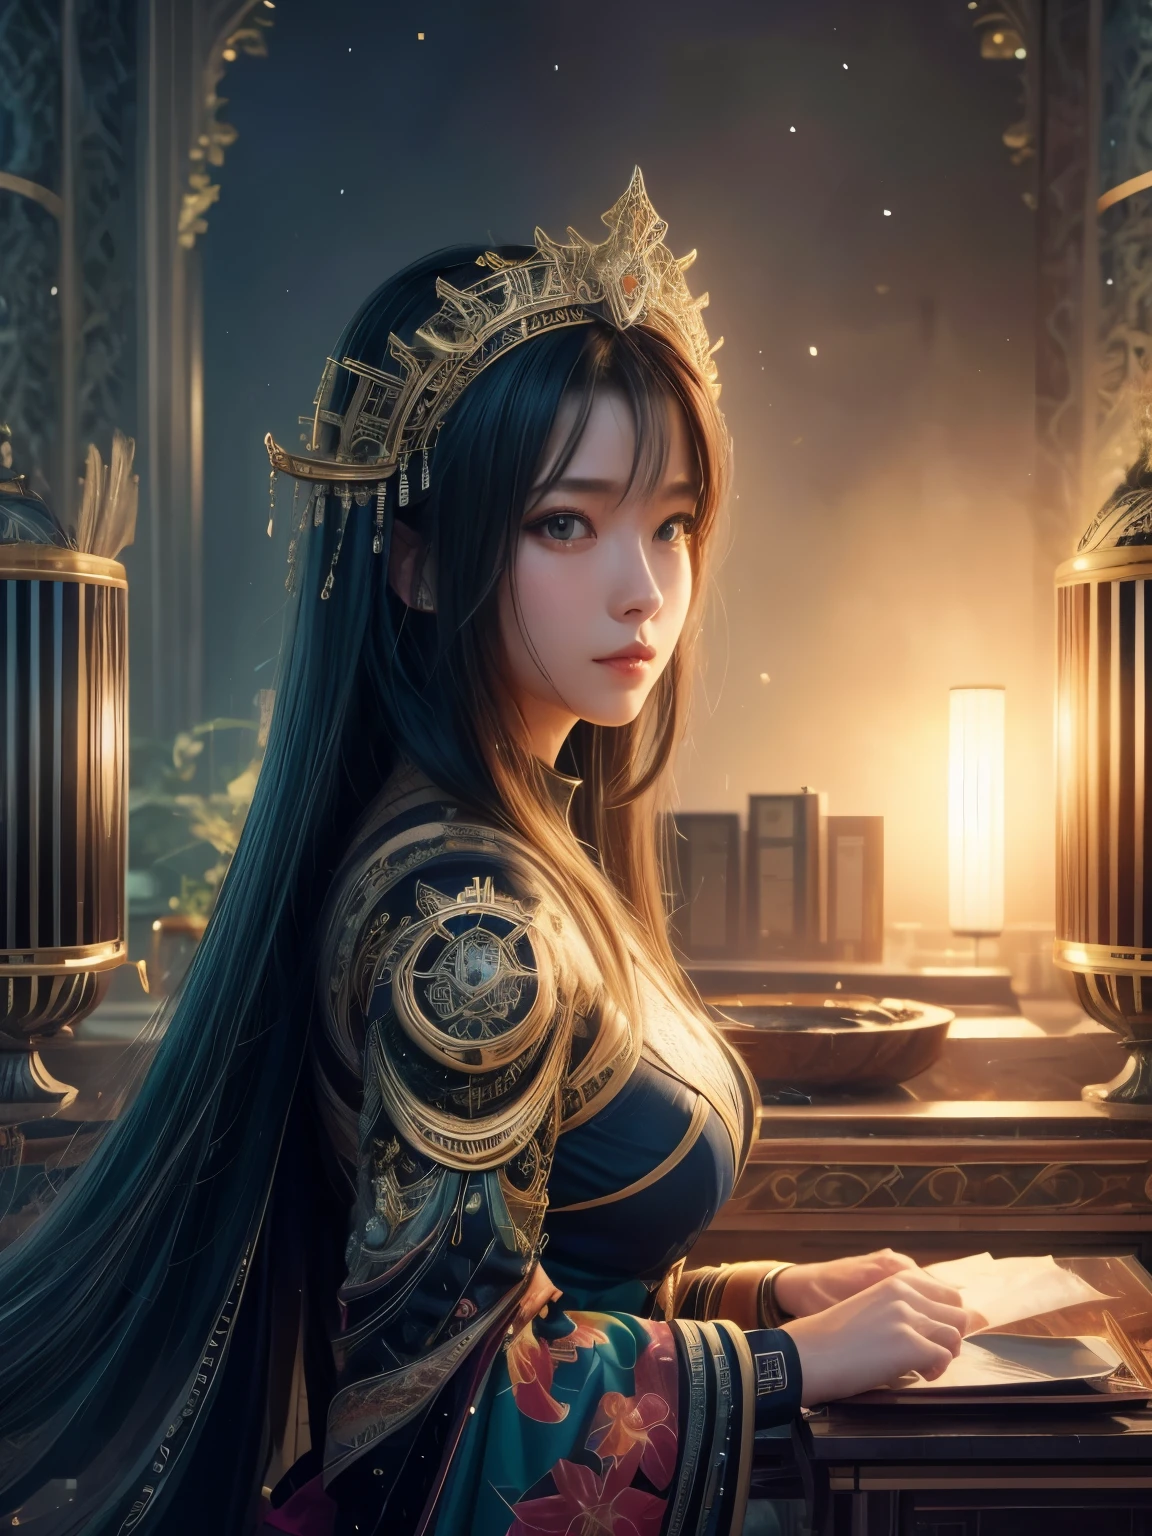 (high quality), (masterpiece), (detailed), 8K, Hyper-realistic portrayal of a futuristic (1girl1.2), Japanese character. Meticulous details bring the character to life in this visually stunning composition, showcasing the seamless blend of tradition and innovation. Trending on Artstation.